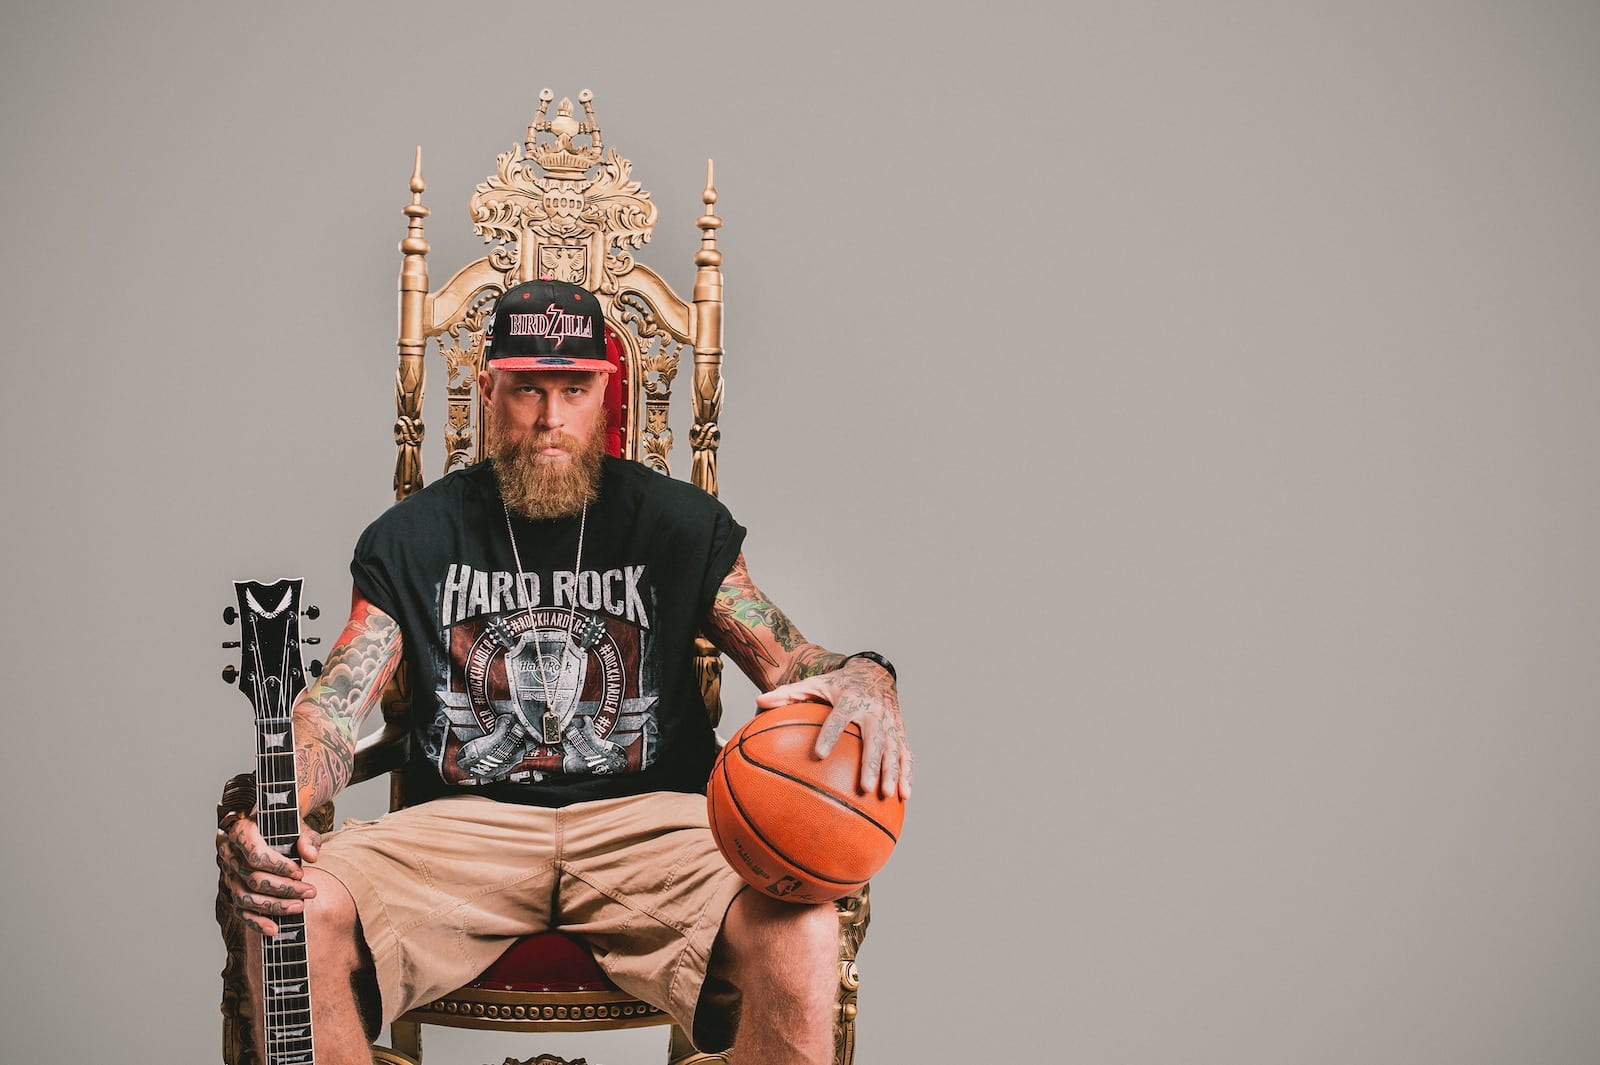 Bearded tattooed man holding guitar in one hand and a basketball in the other sitting on a throne posing for camera wearing a black Hard Rock tshirt